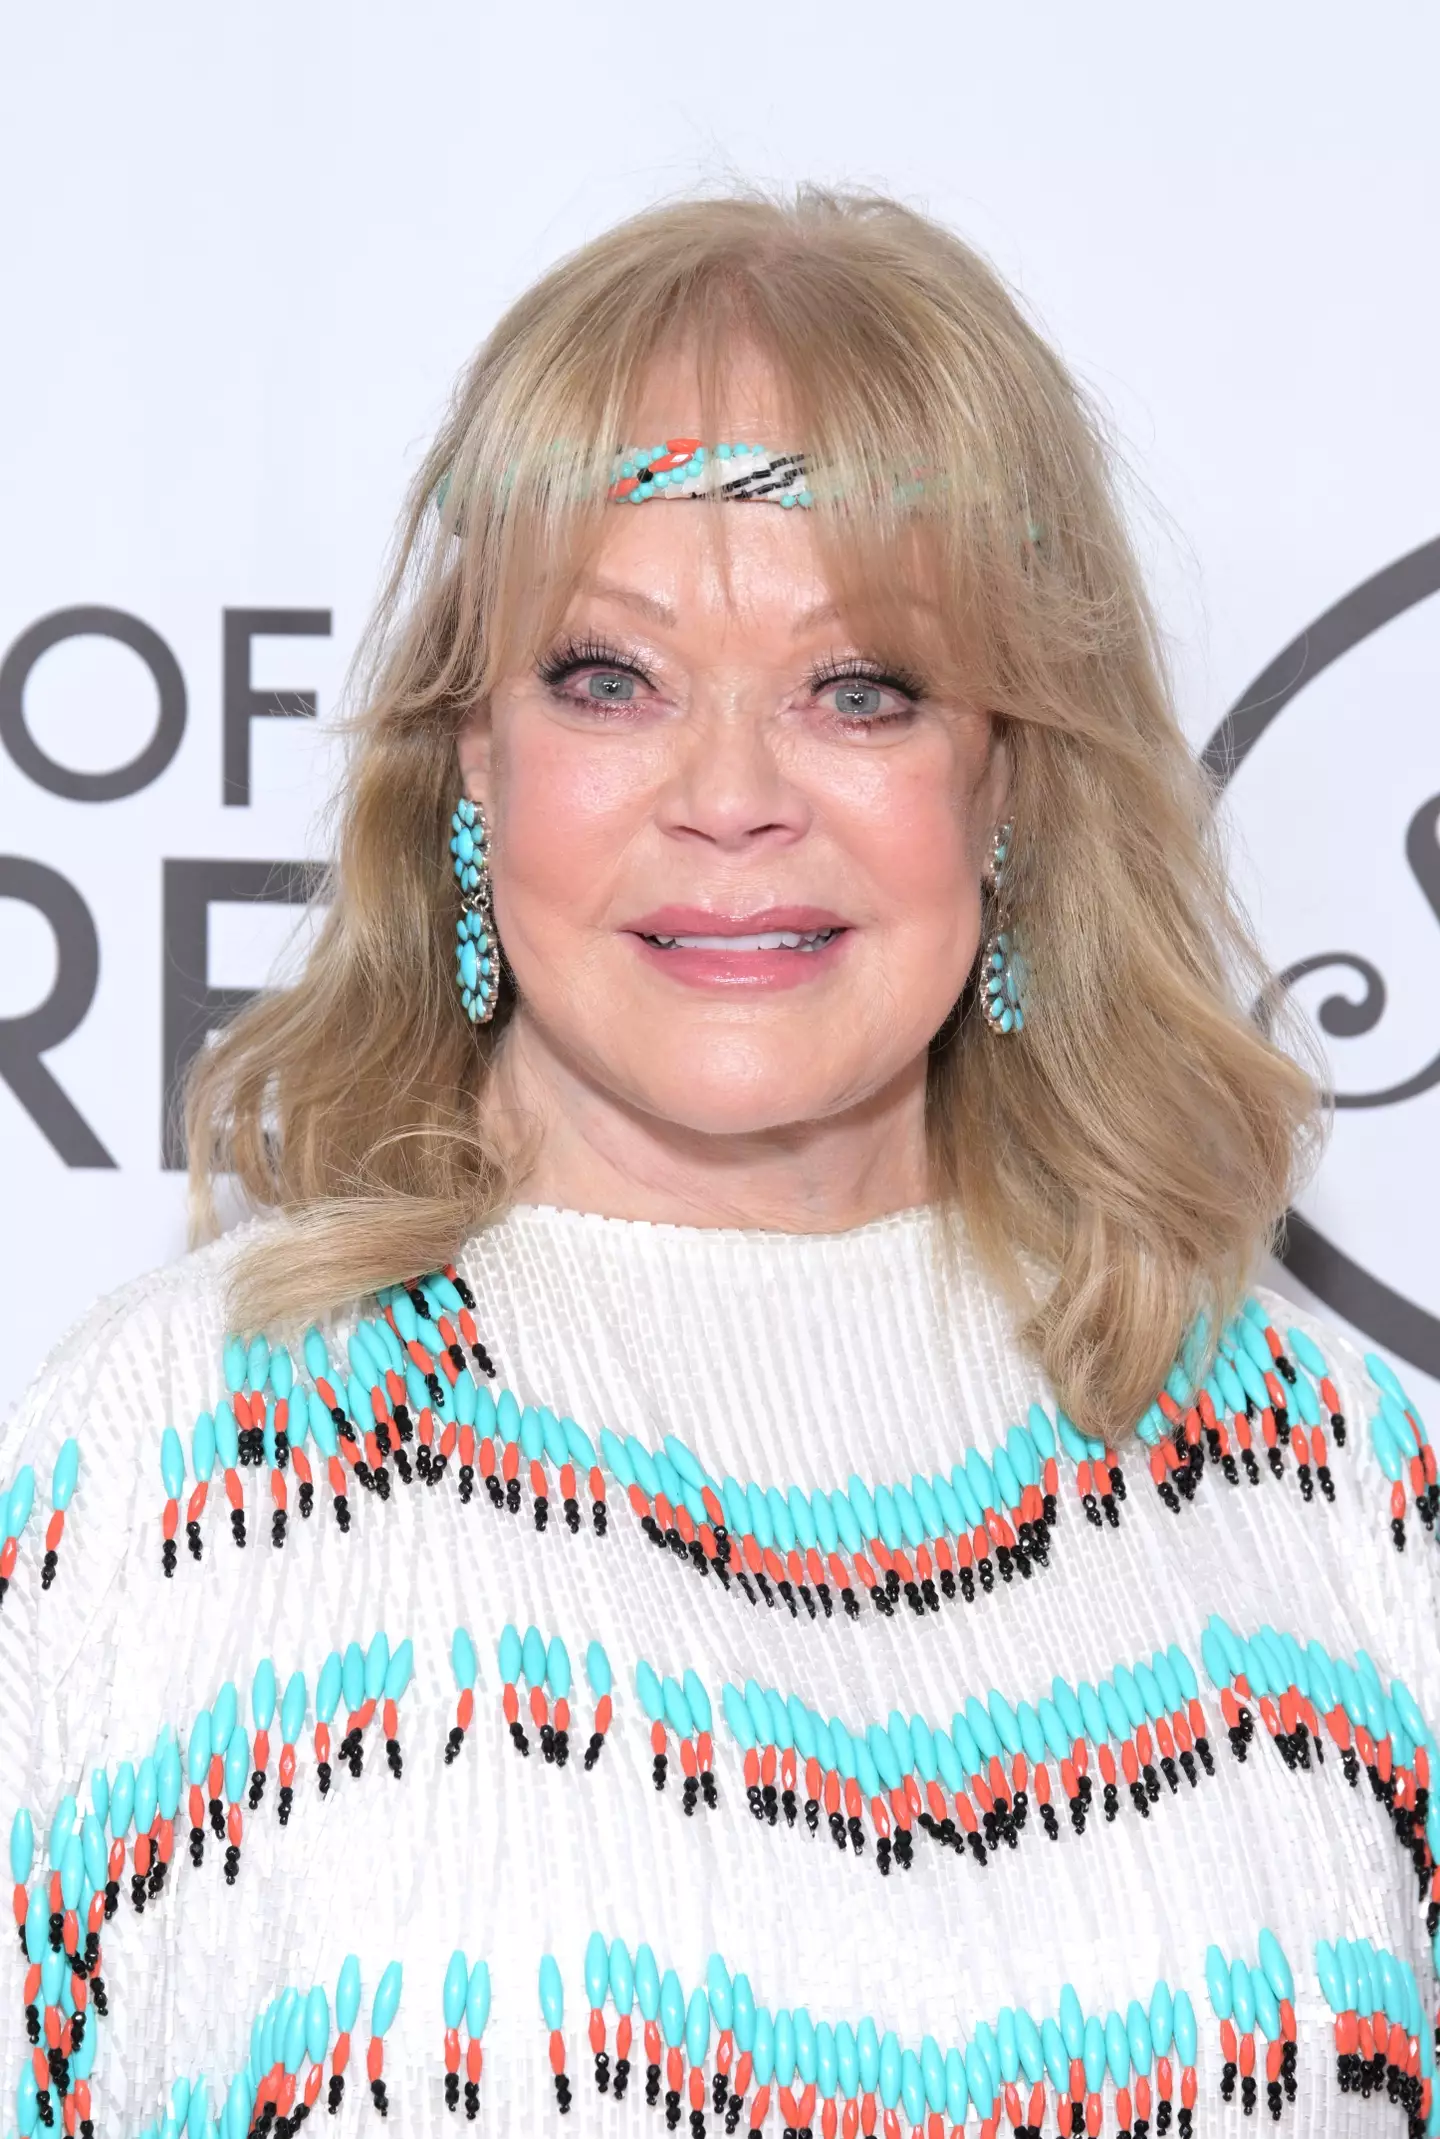 Candy Spelling reportedly offered her daughter help.